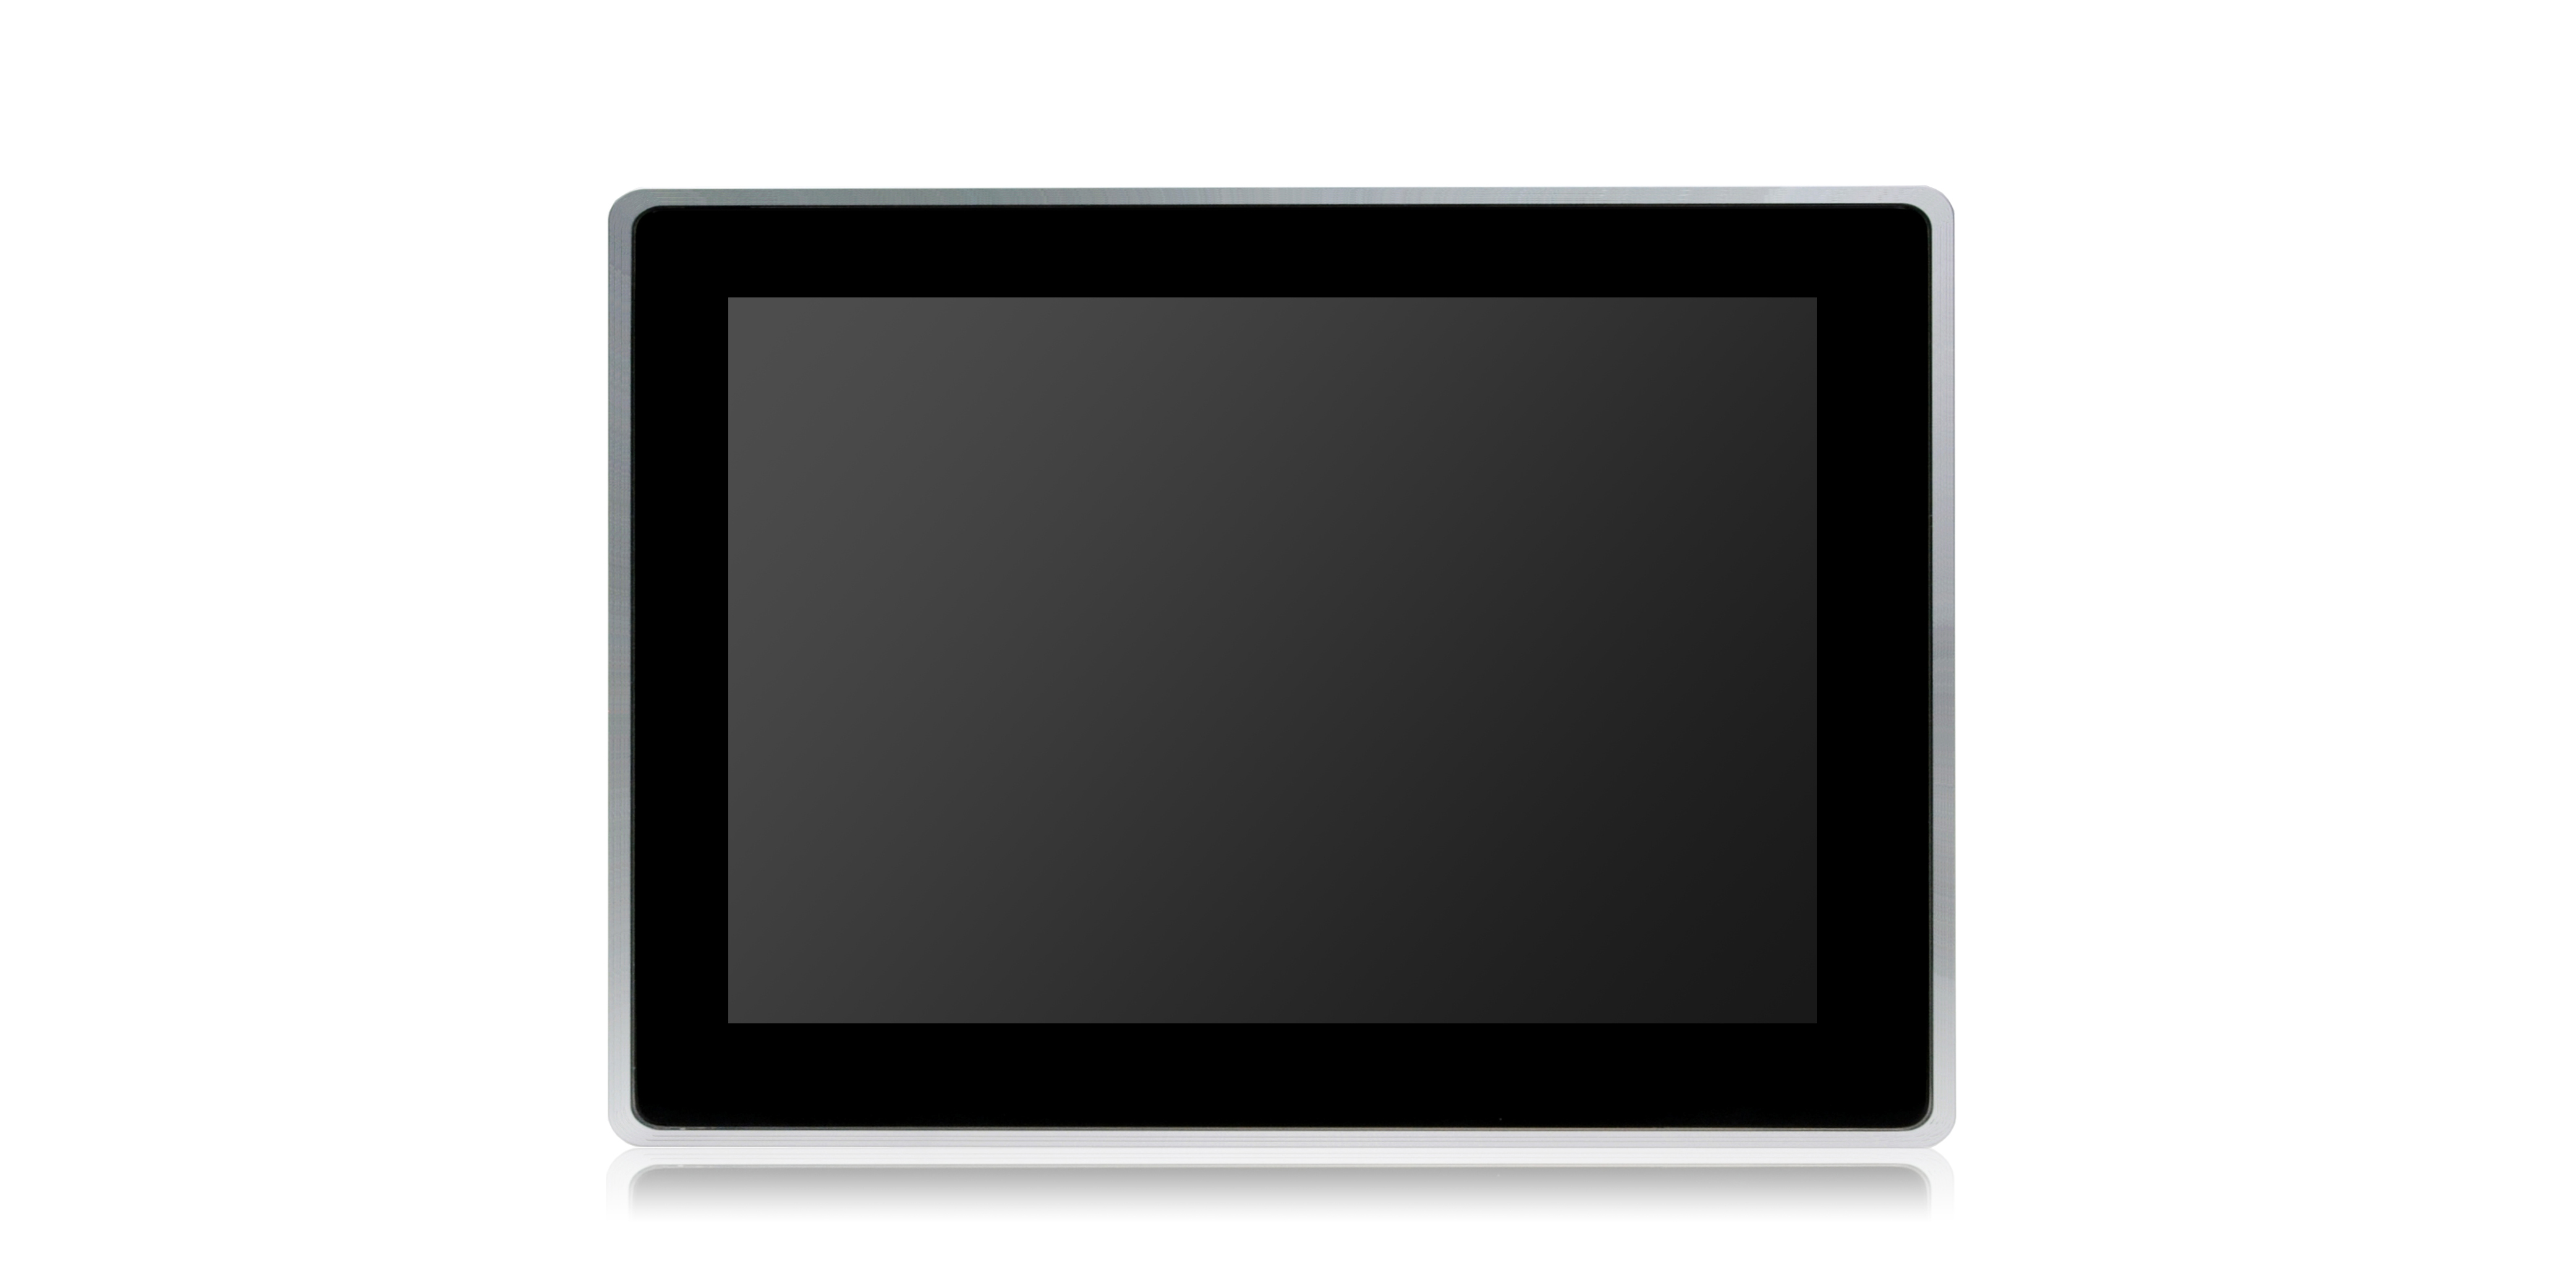 Surface-mounted touch panel PC with widescreen display